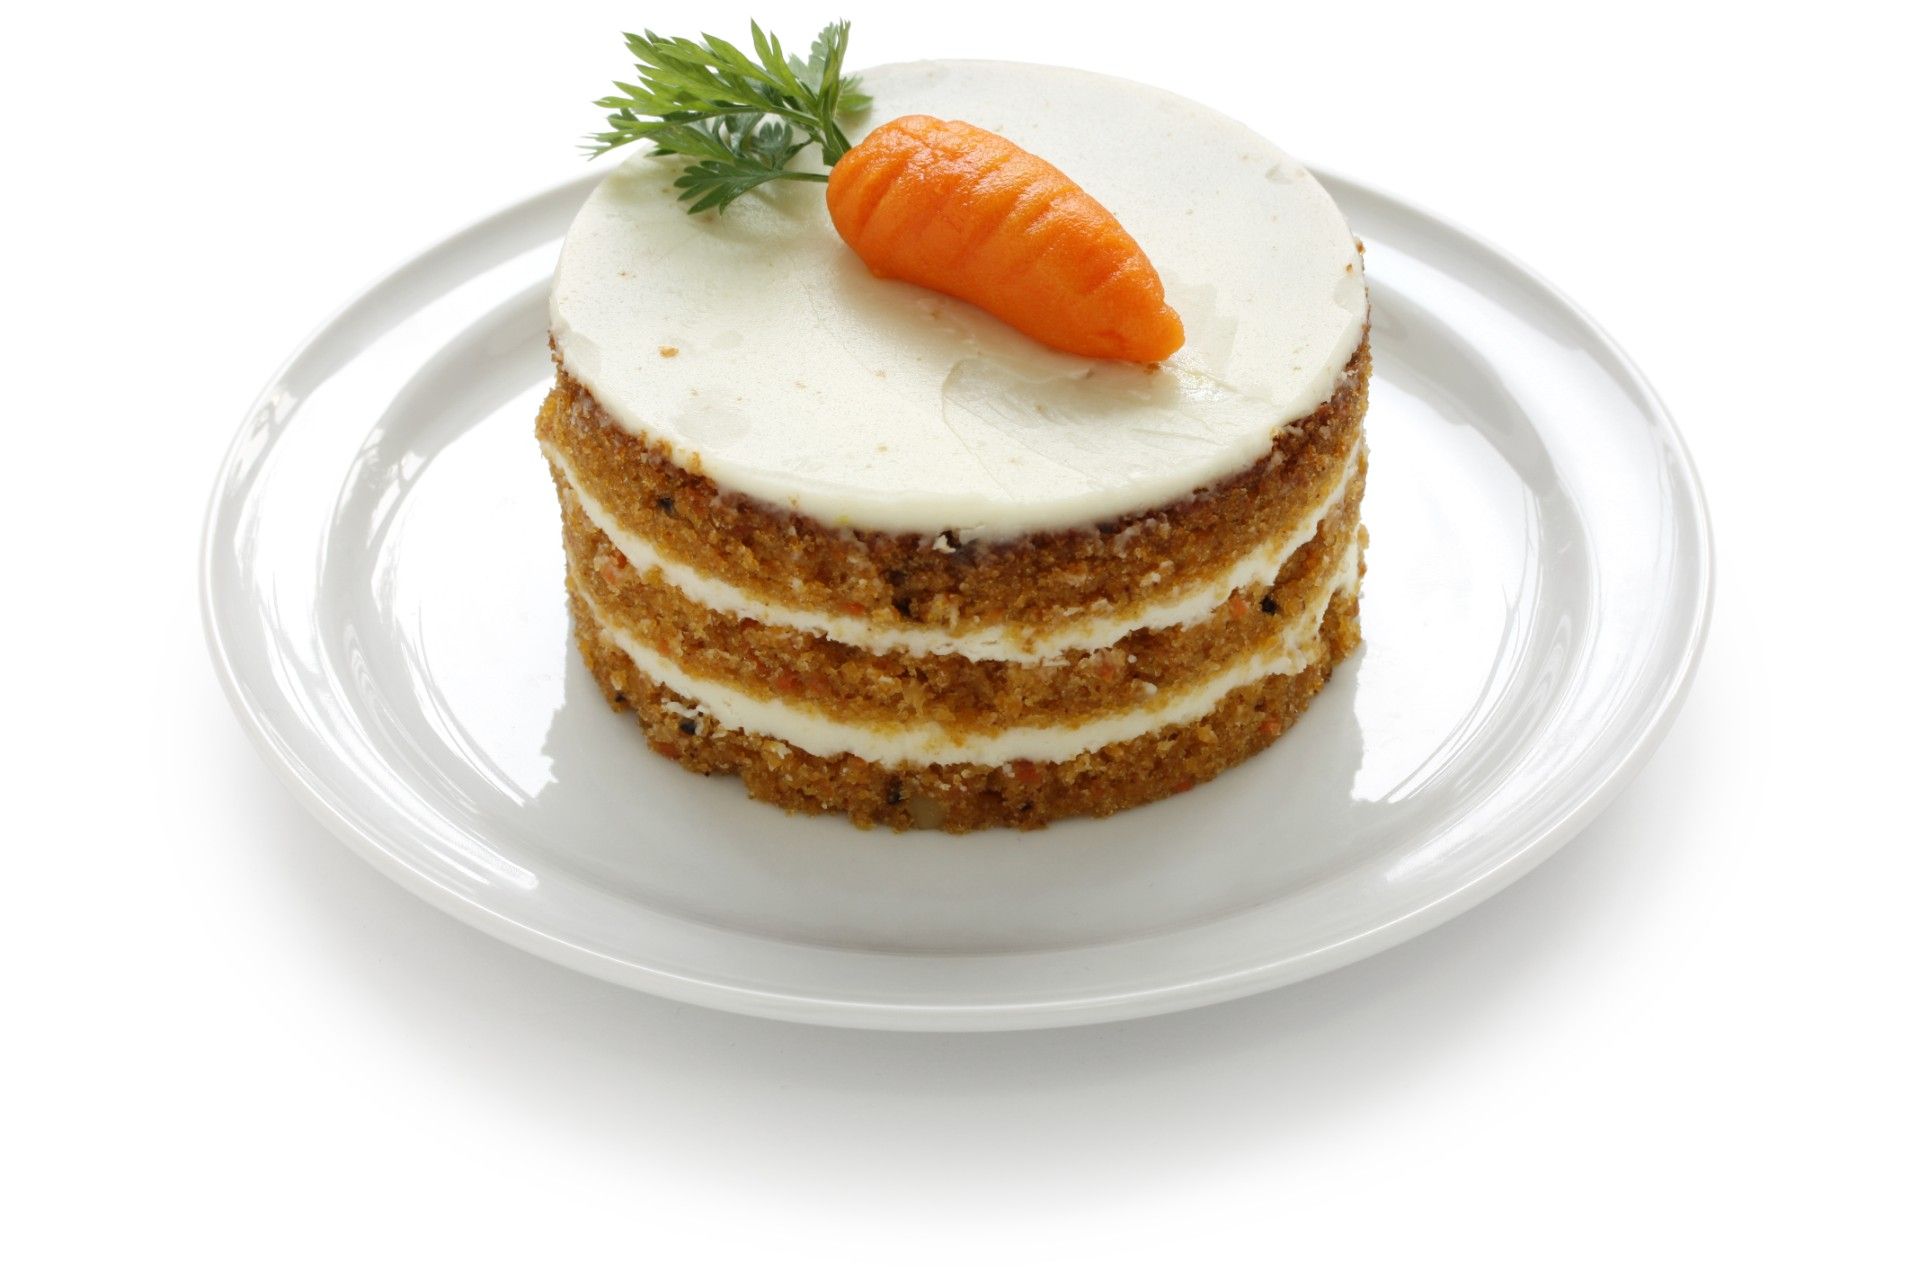 Round piece of carrot cake on a white plate - Hostess Donettes